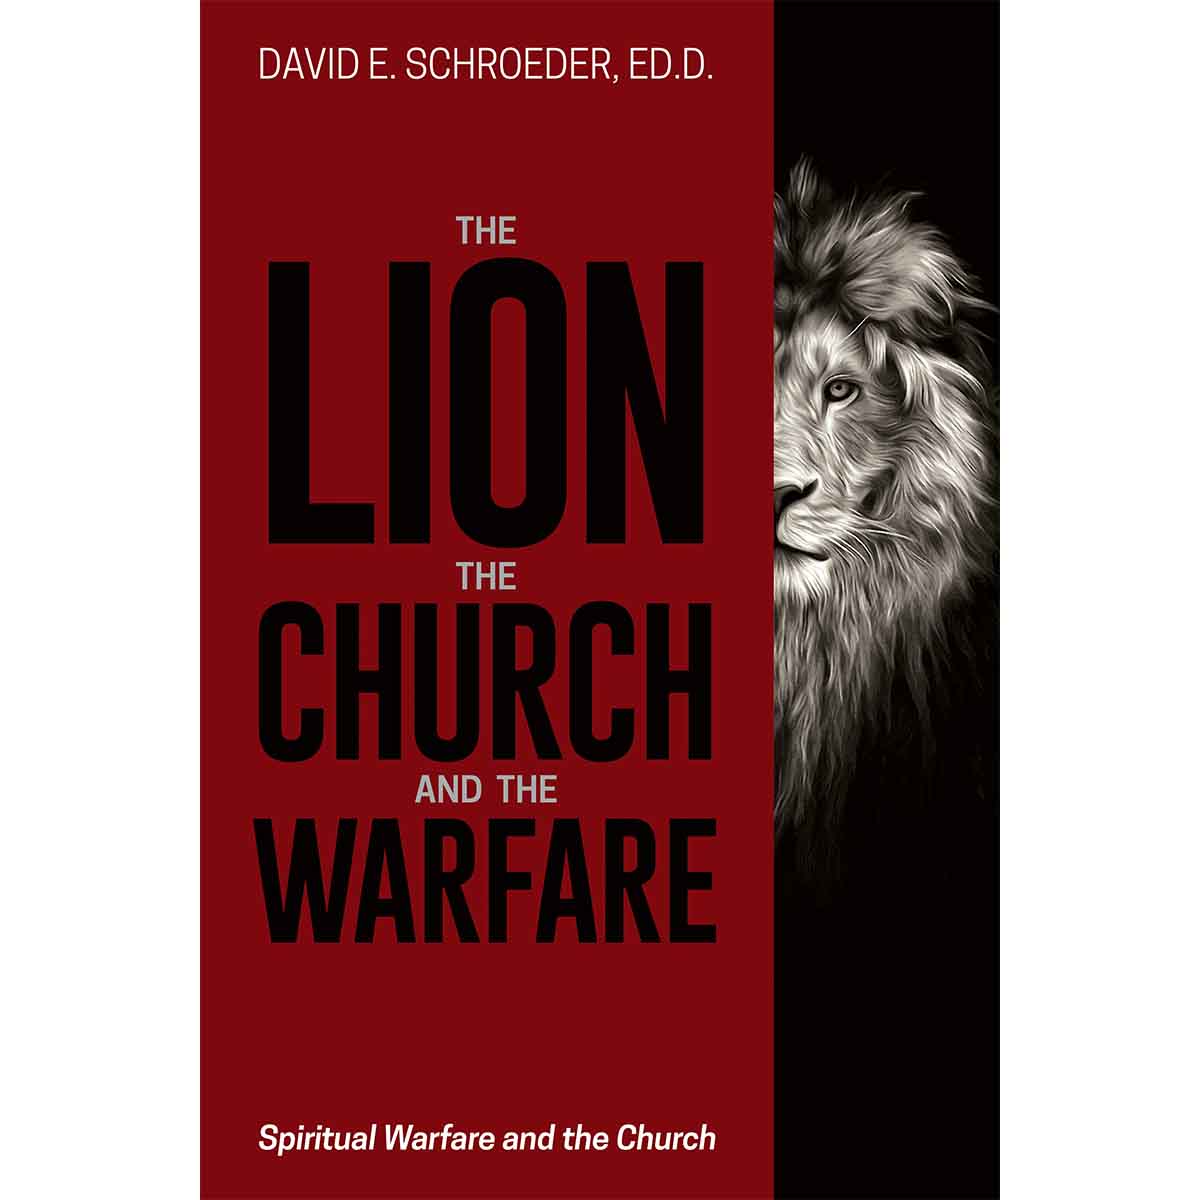 The Lion, The Church, and the Warfare